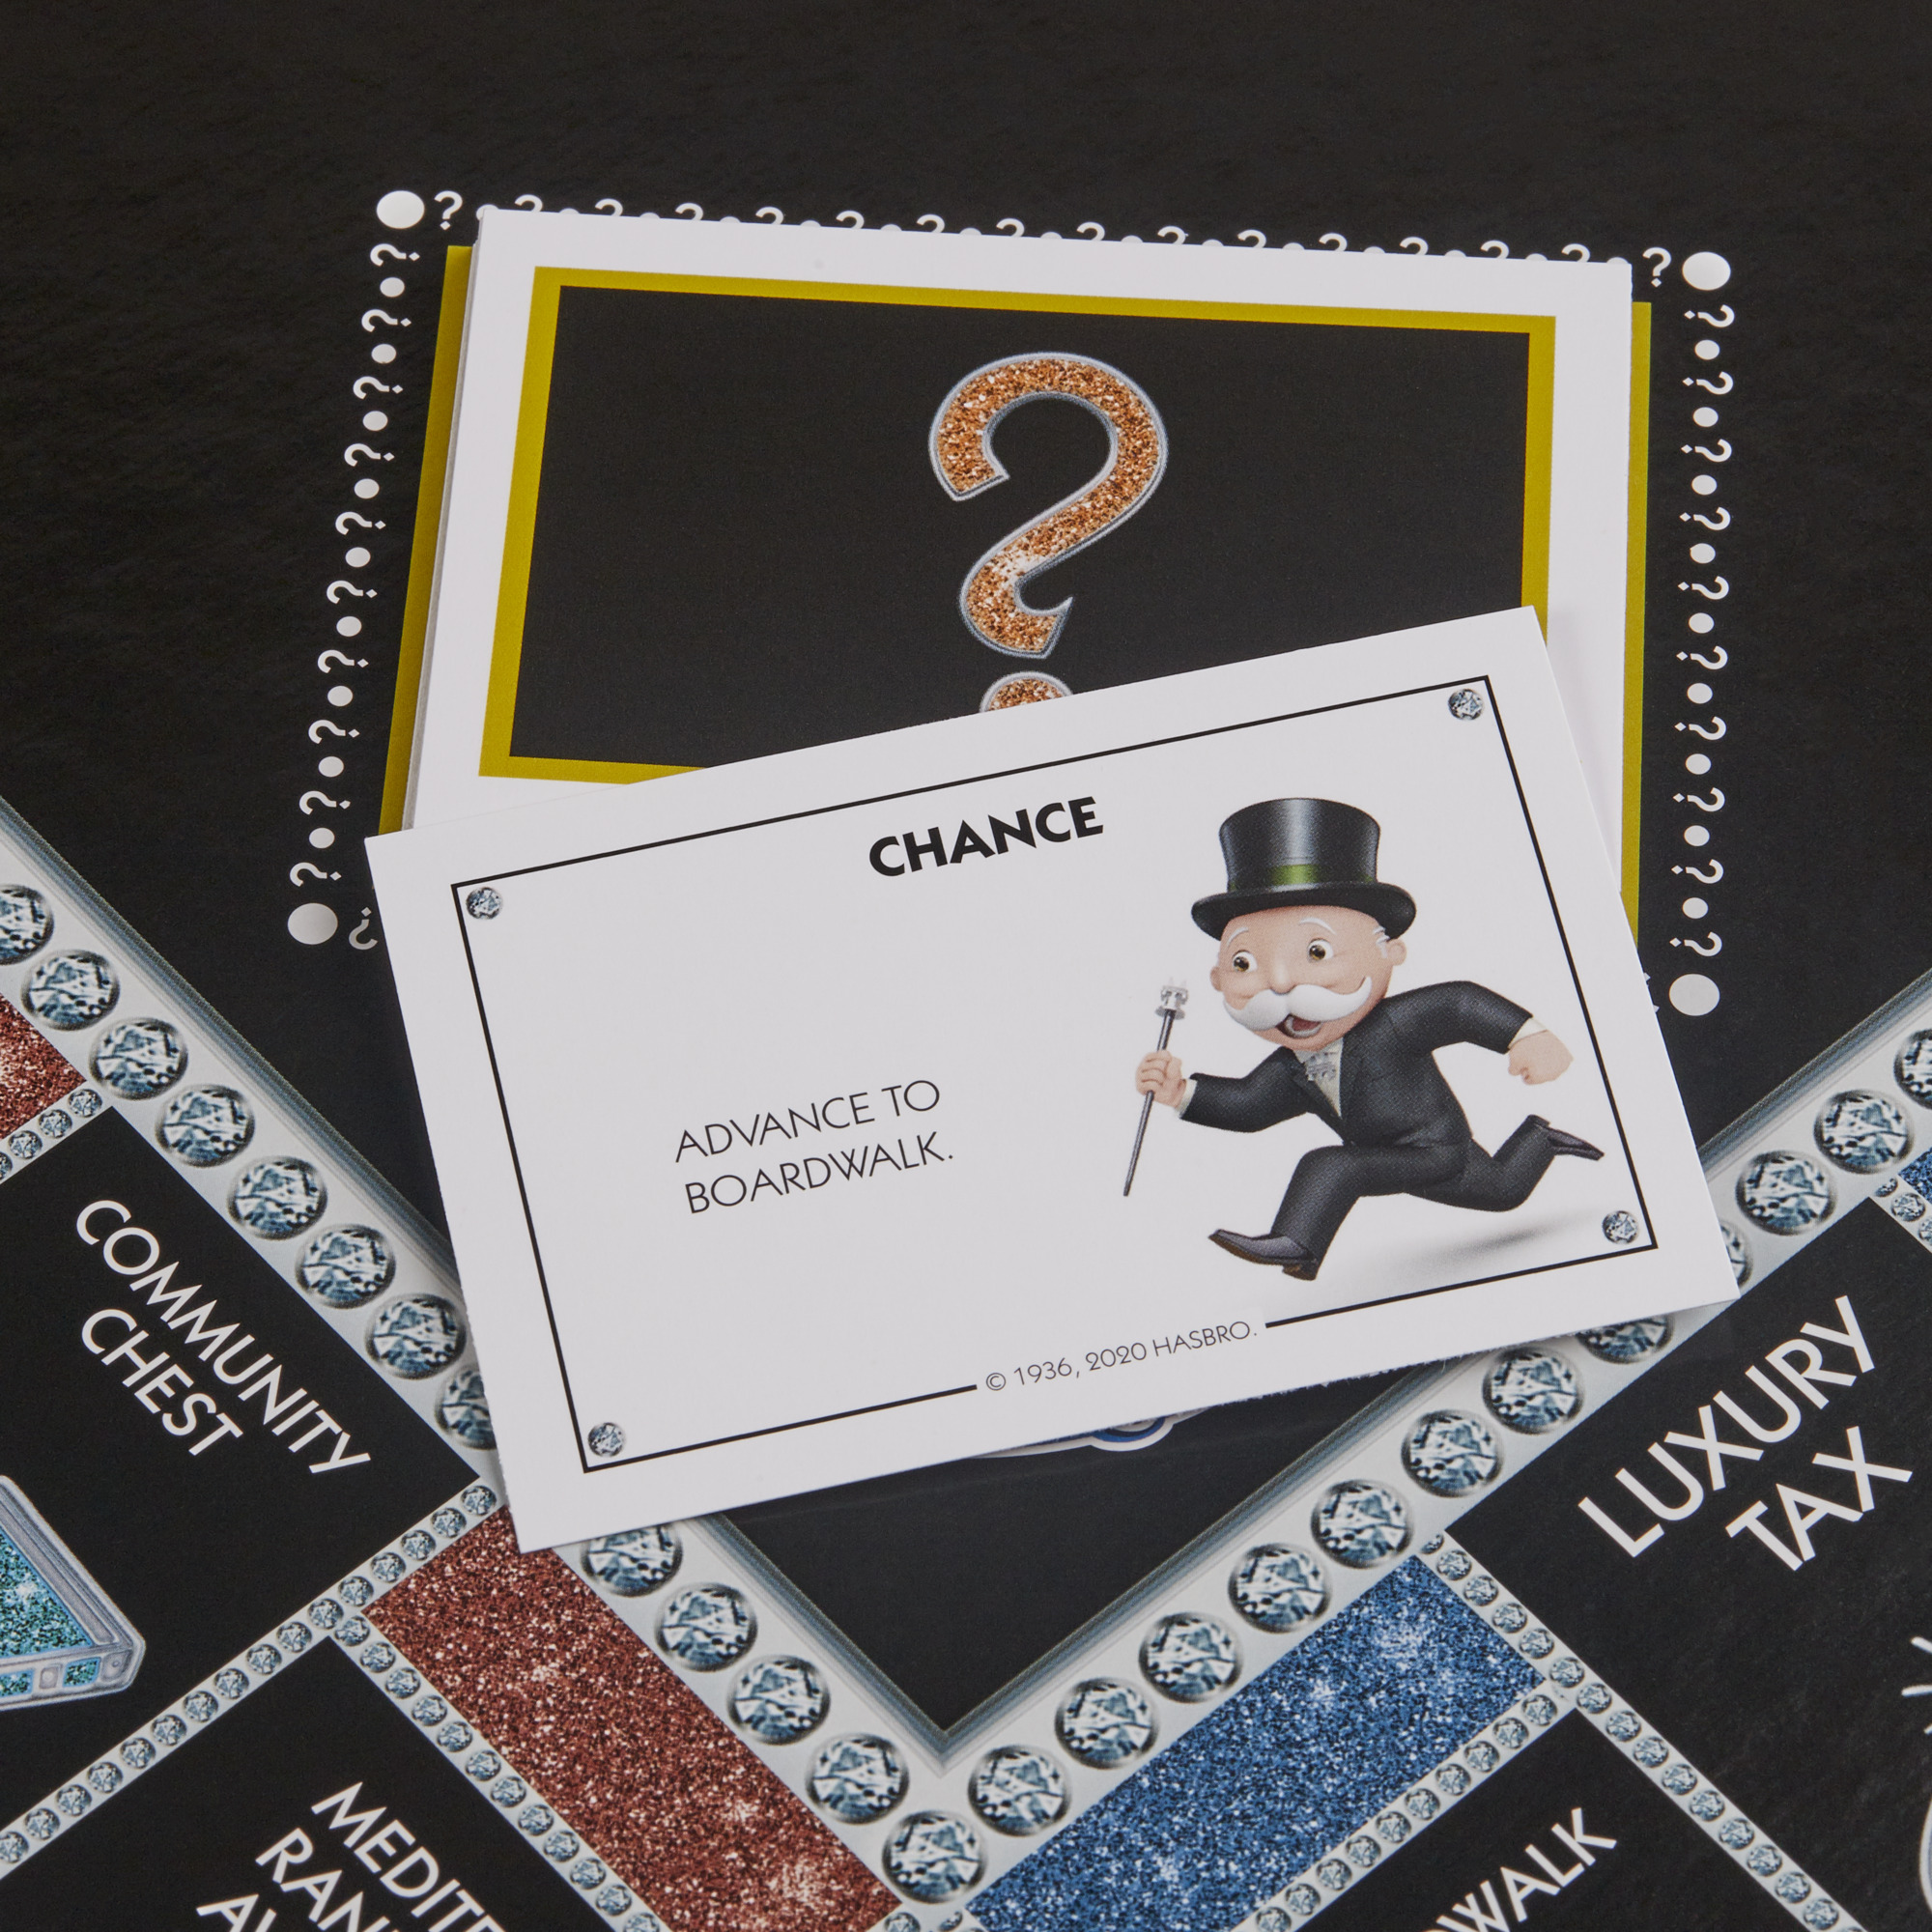 Monopoly 85Th anniversary Game, includes 8 Golden tokens - image 4 of 8